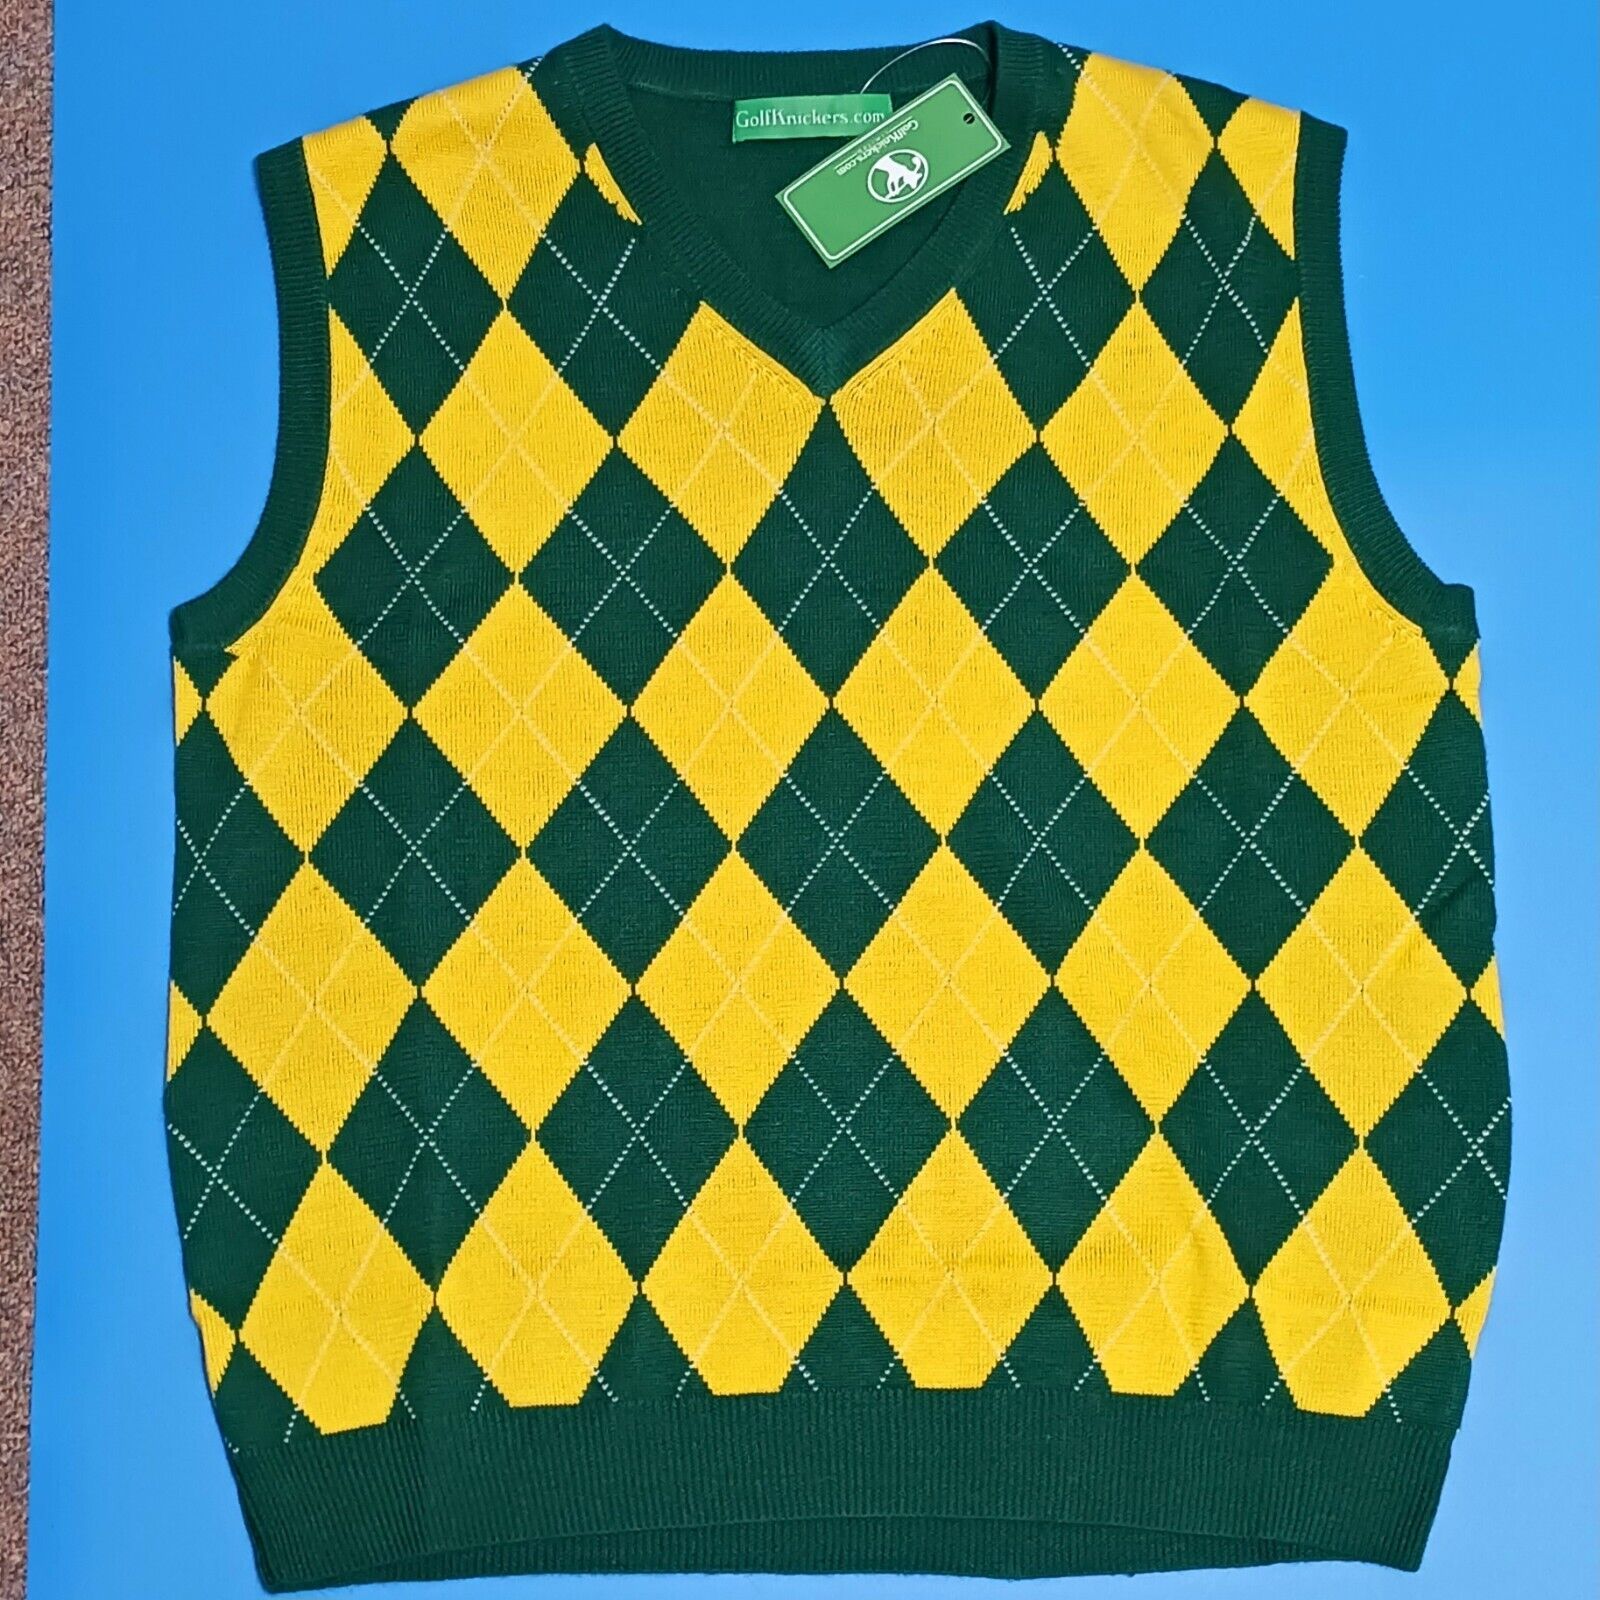 Golf Knickers Mens XL Sweater Vest Master\'s Yellow Green Argyle Brand New w Tags